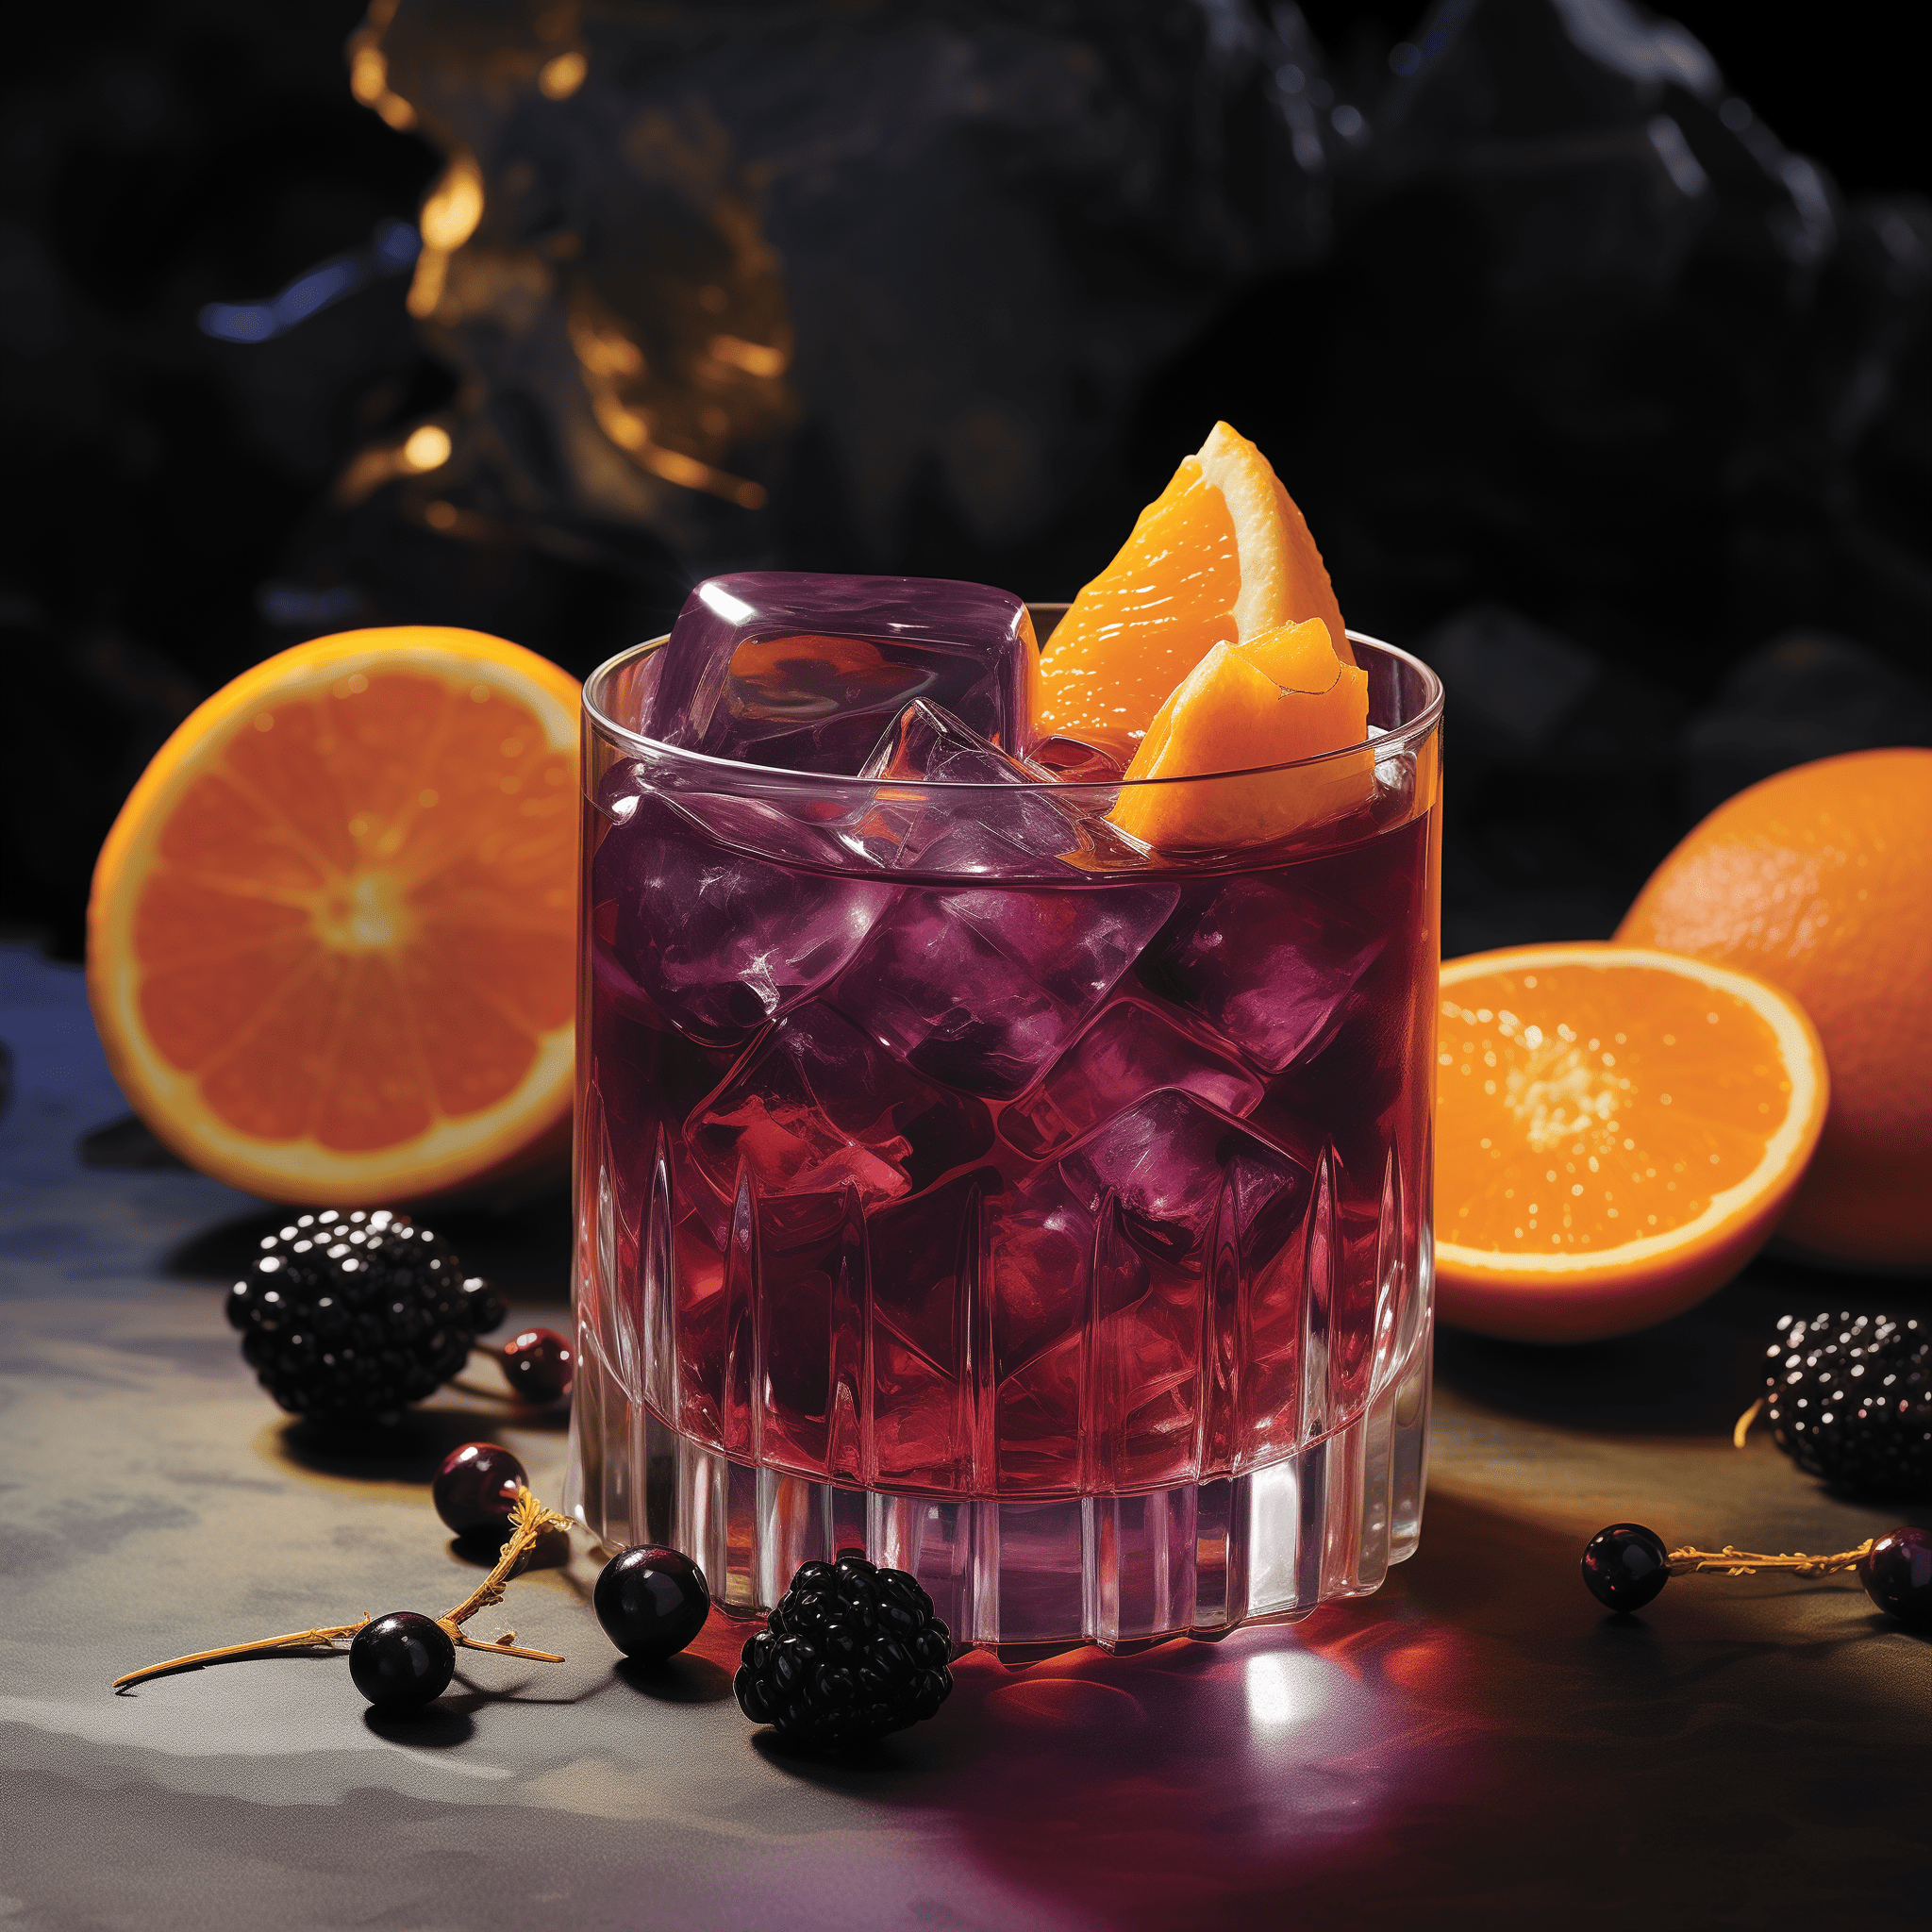 Blackberry Old Fashioned Cocktail Recipe - The Blackberry Old Fashioned is a harmonious blend of sweet and sour with a robust whiskey foundation. The muddled blackberries contribute a tart fruitiness, while the simple syrup and bitters balance it with sweetness and depth. The orange peel garnish adds a zesty aroma and a slight bitterness that complements the drink's complexity.